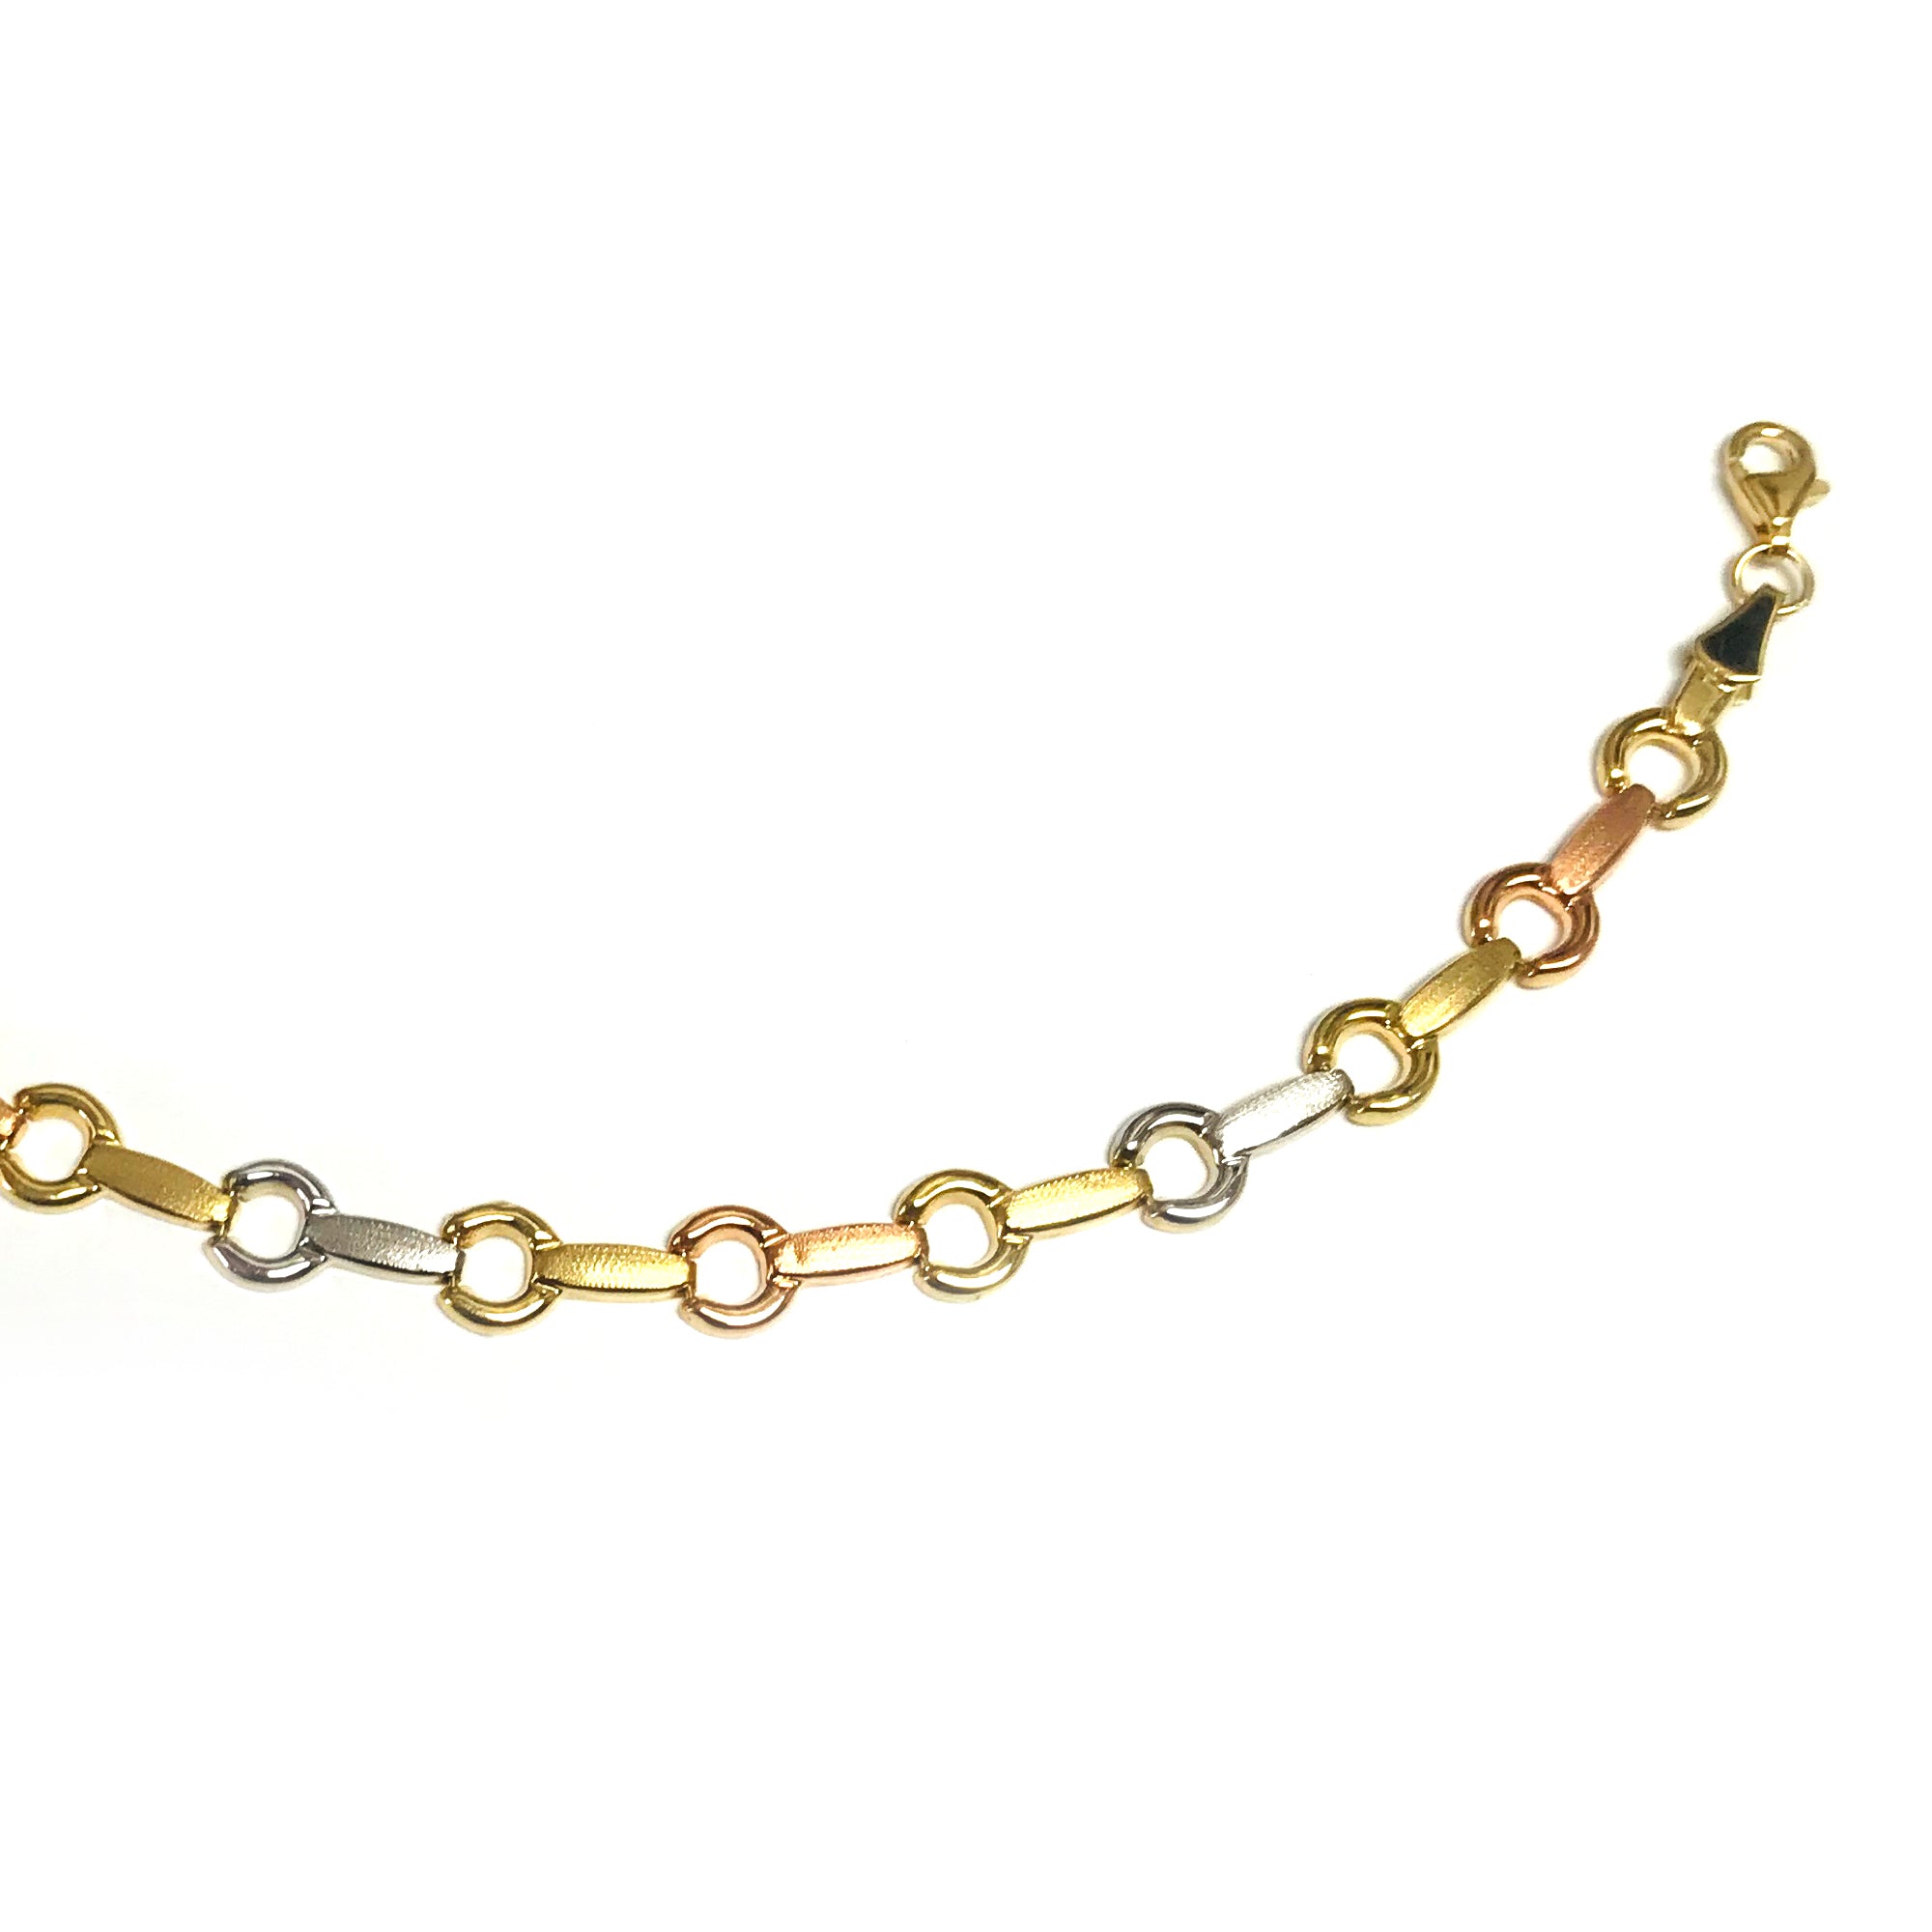 14k Yellow White And Rose Gold Links Fancy Bracelet, 7.25" fine designer jewelry for men and women